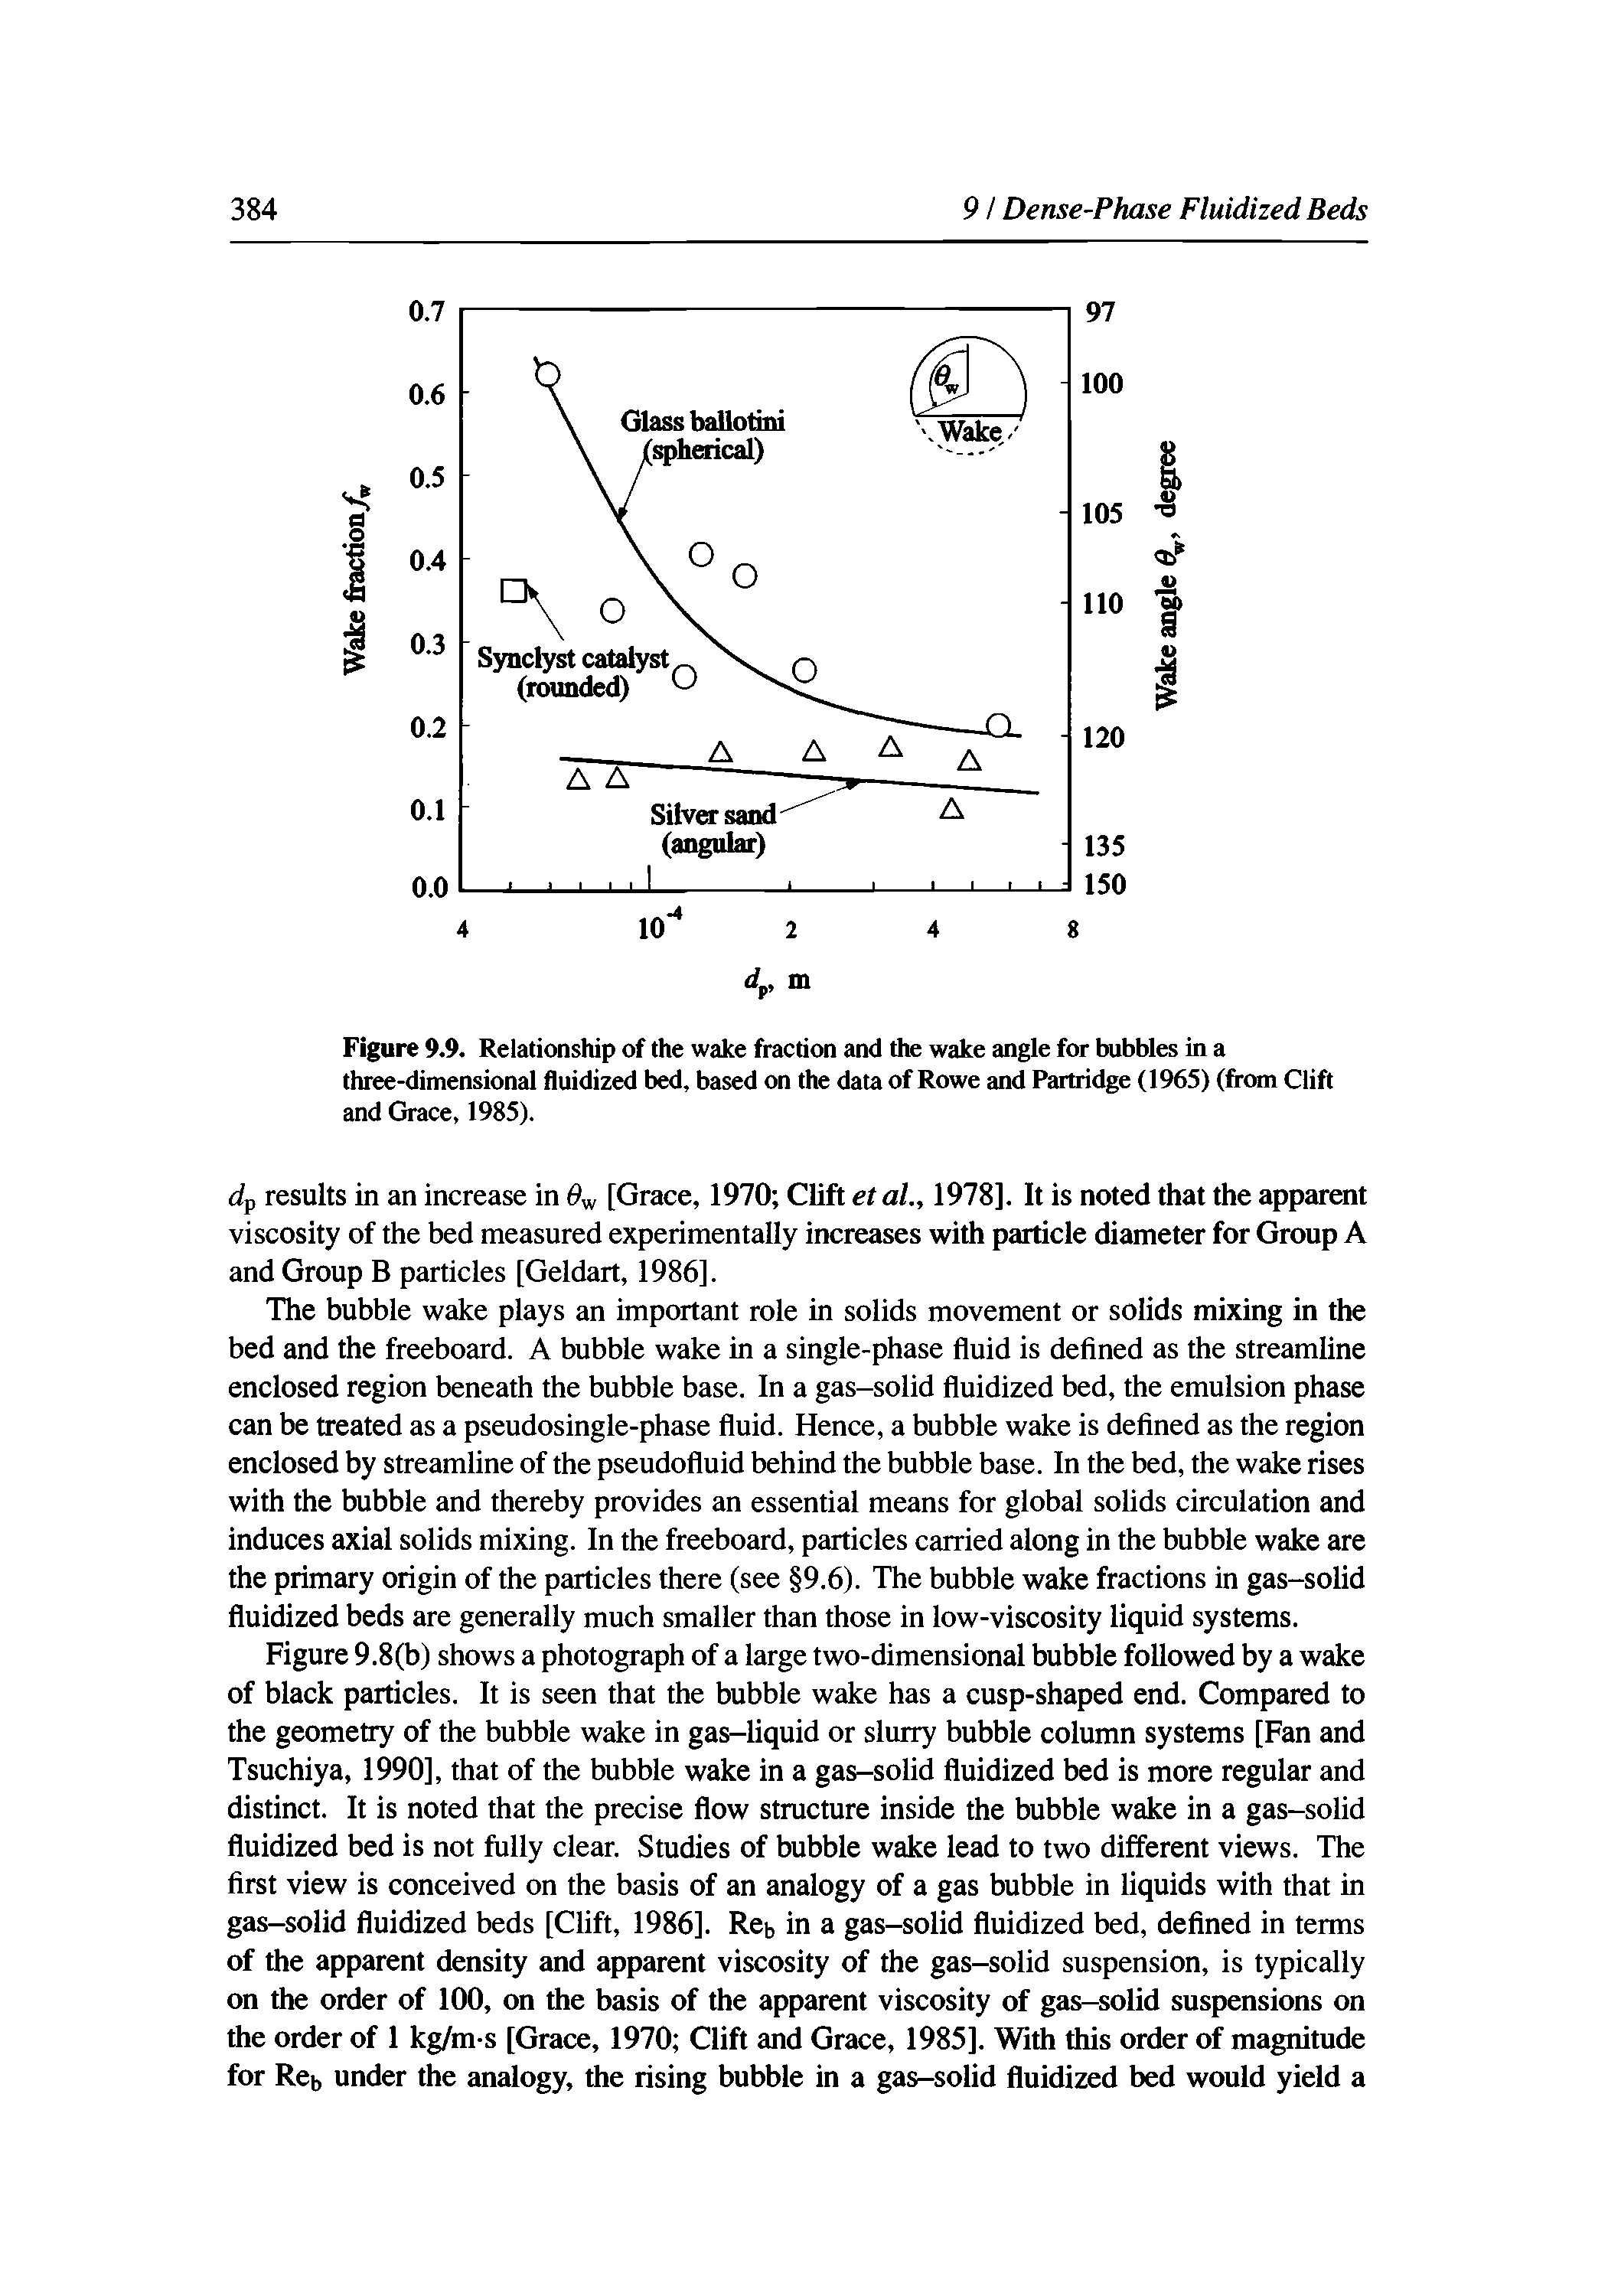 Figure 9.9. Relationship of the wake fraction and the wake angle for bubbles in a three-dimensional fluidized bed, based on the data of Rowe and Partridge (1965) (from Clift and Grace, 1985).